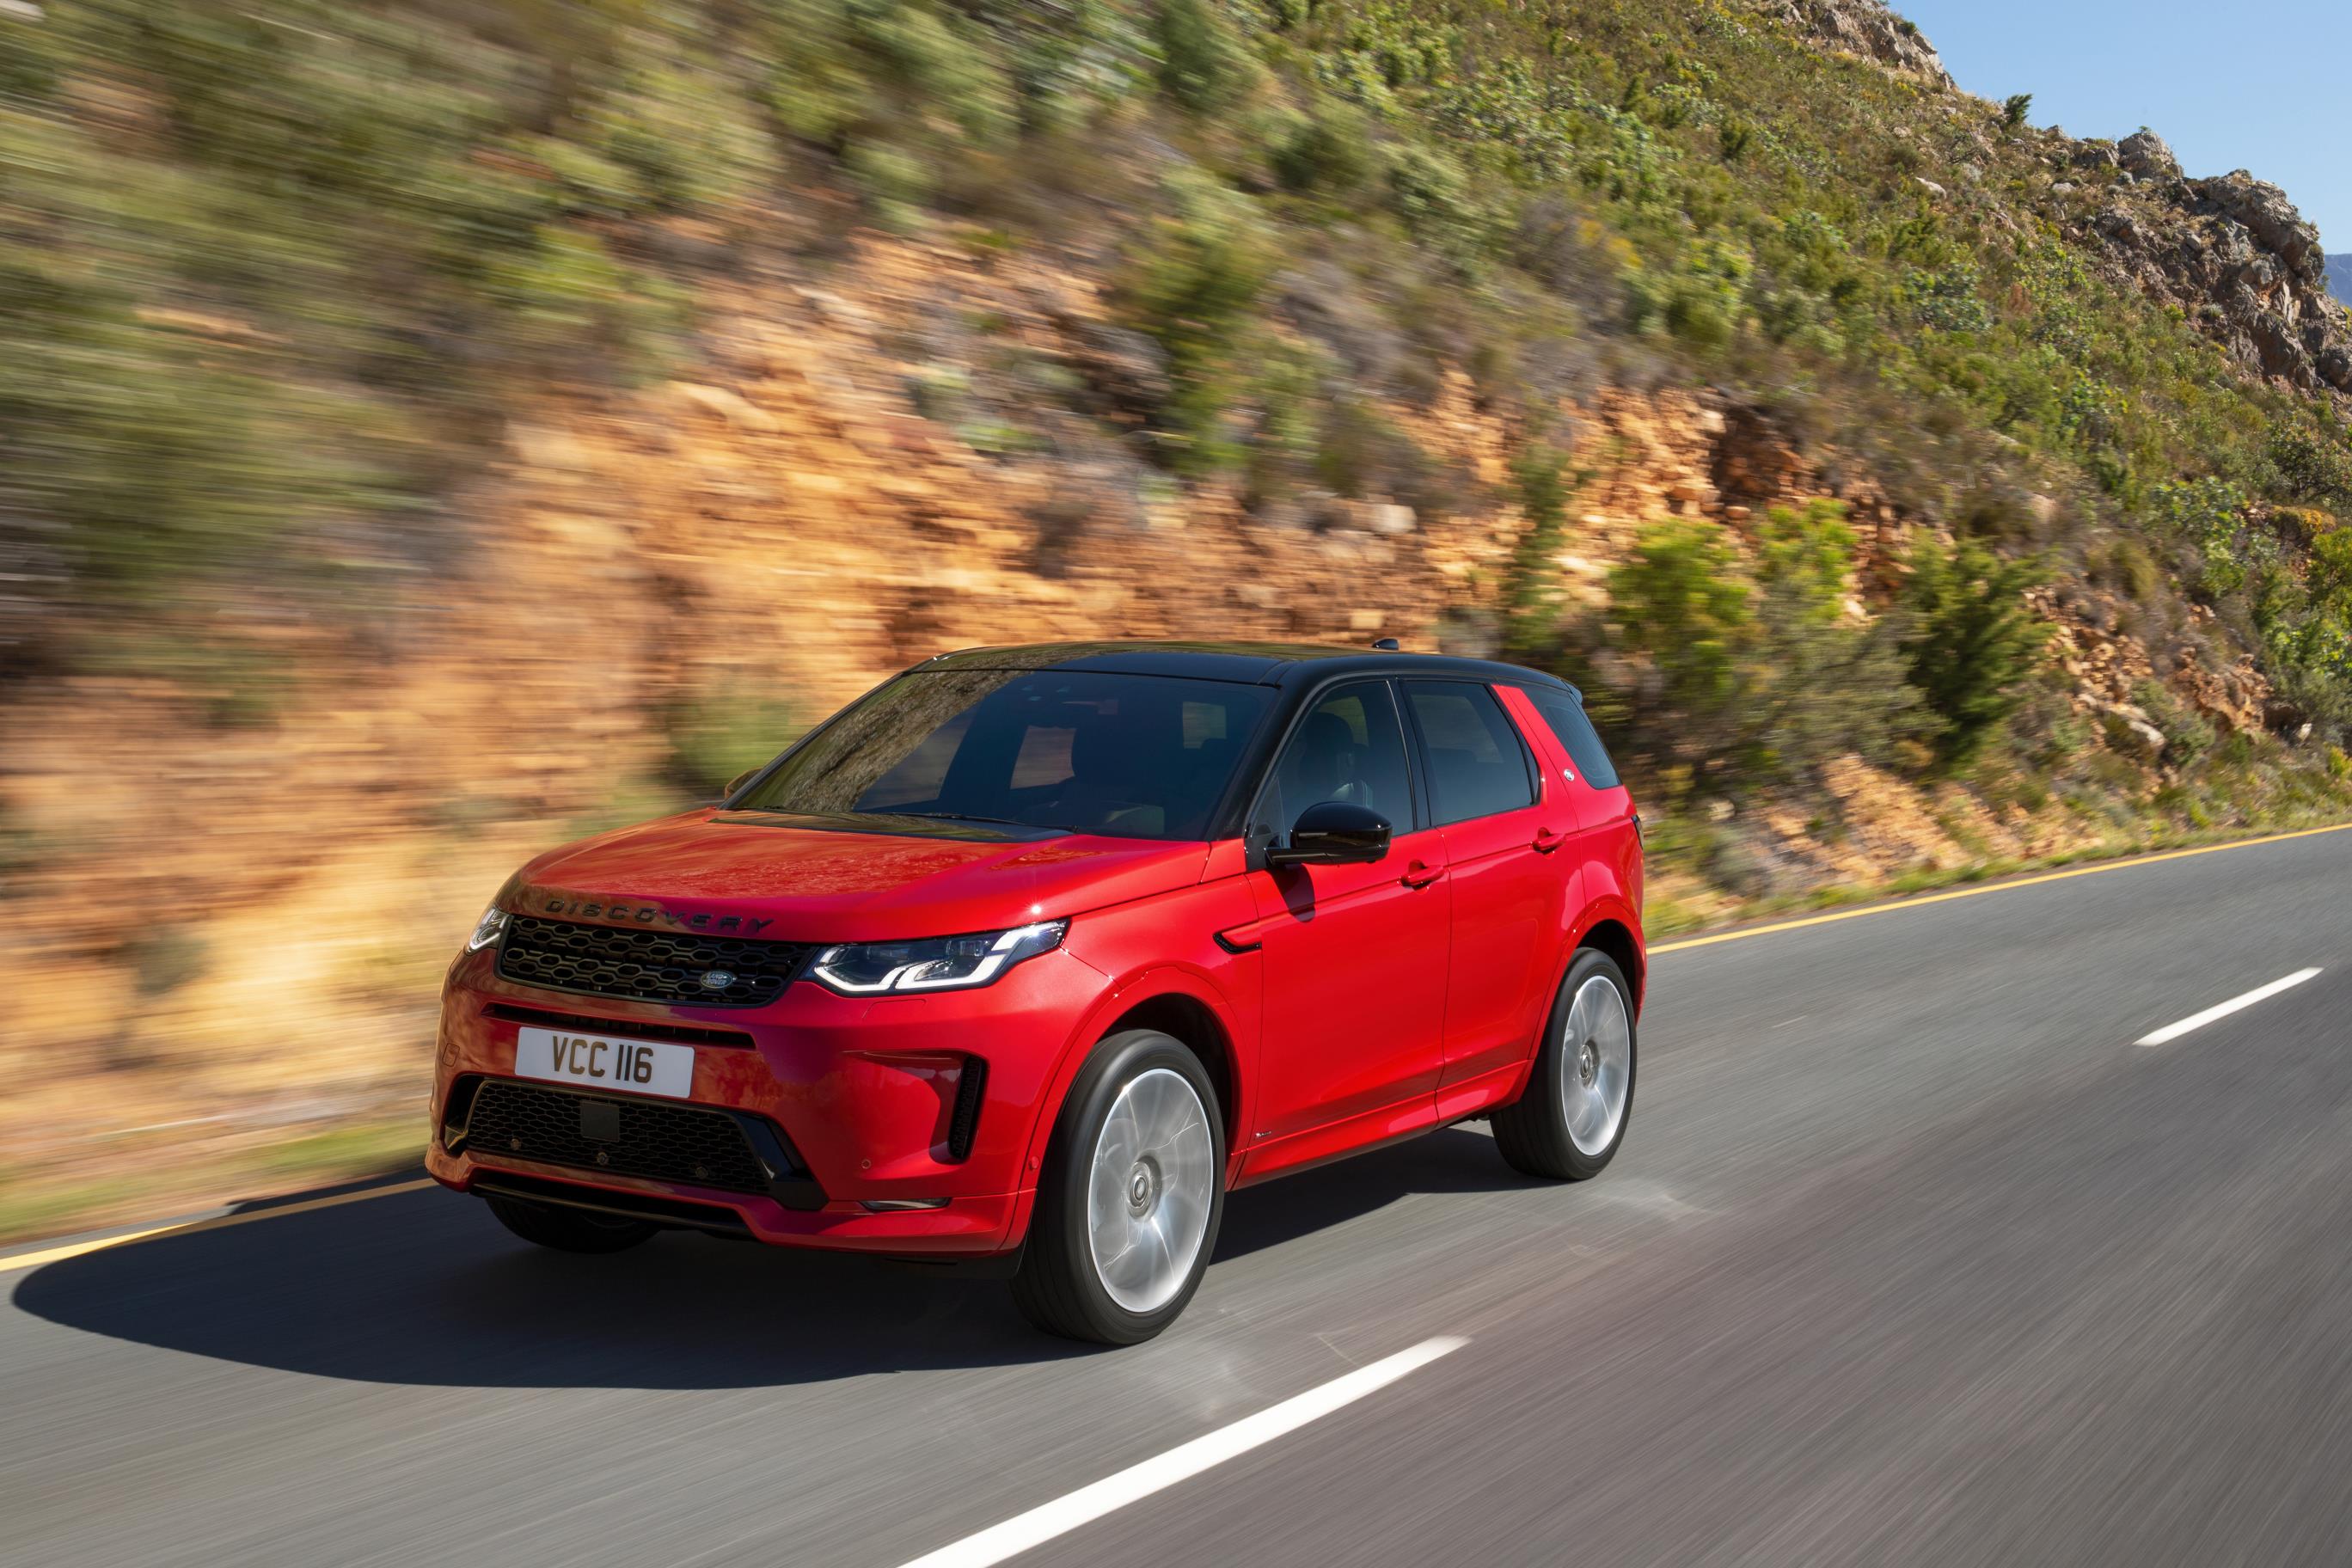 New Land Rover Discovery Sport unveiled